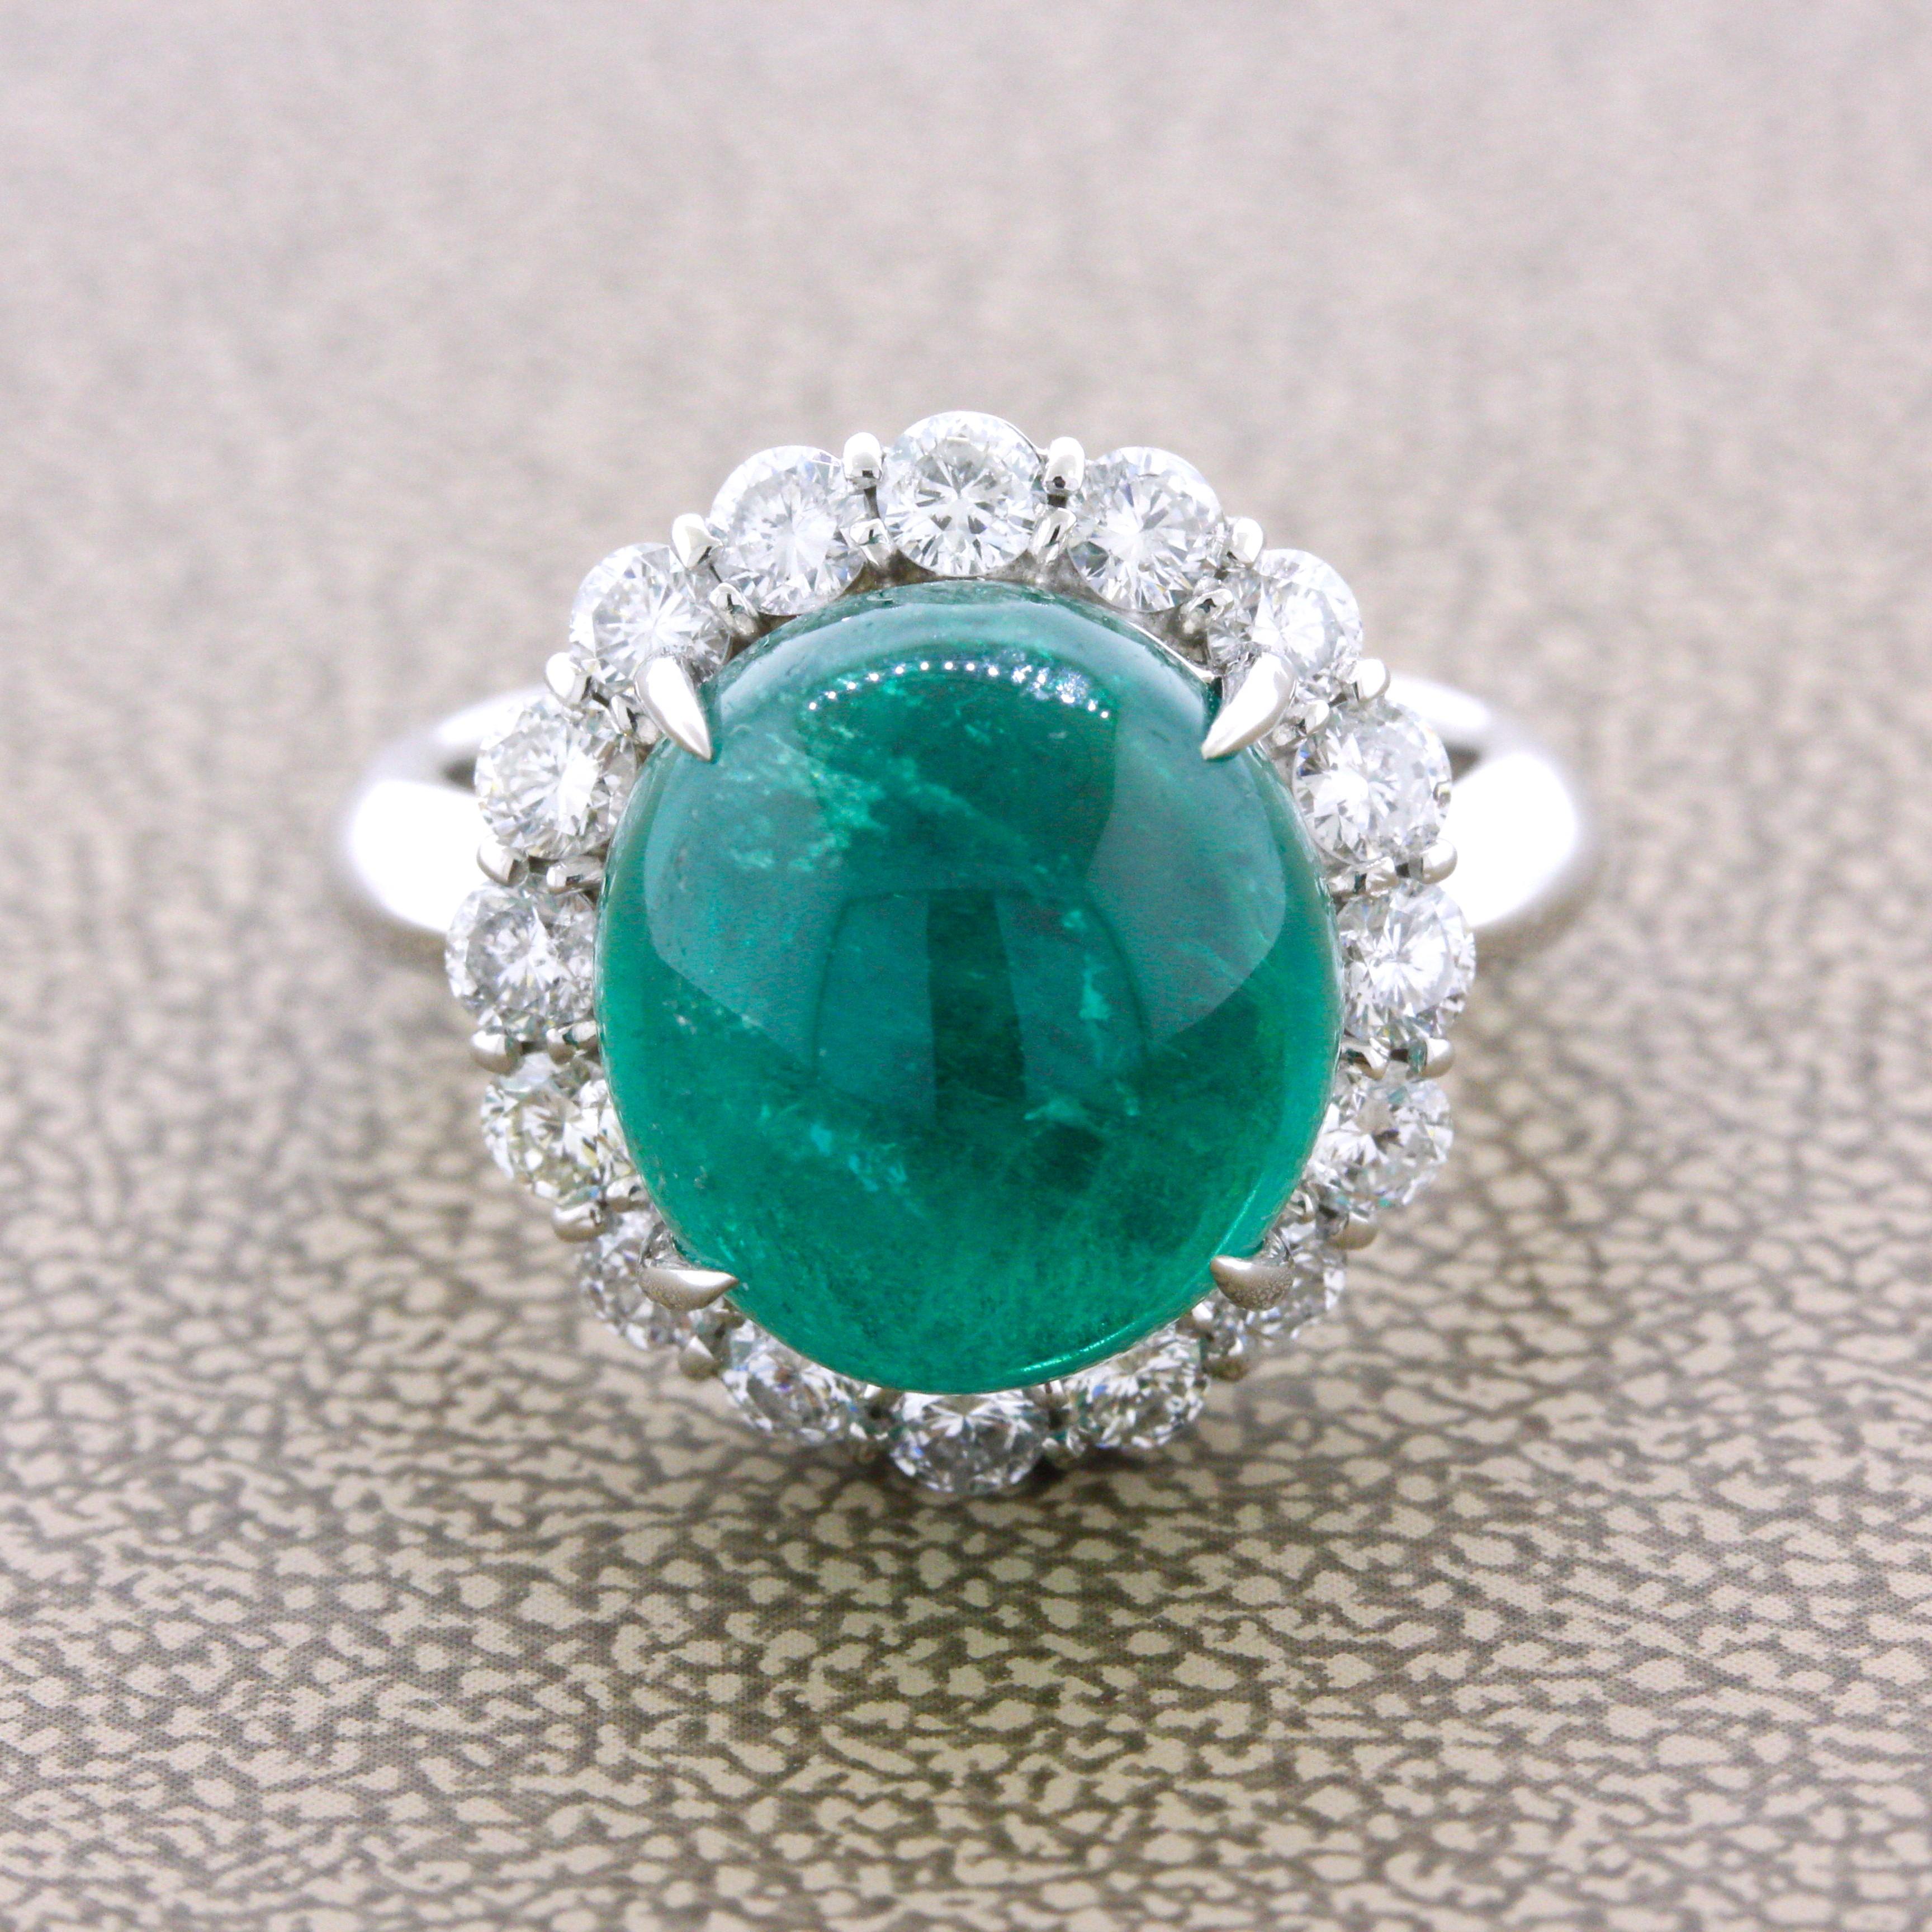 A superb emerald weighing an impressive 7.78 carats takes center stage. What makes this emerald special is its amazing color. It has a rich intense vivid green color which only the finest of emeralds possess. Adding to that, it has great brightness